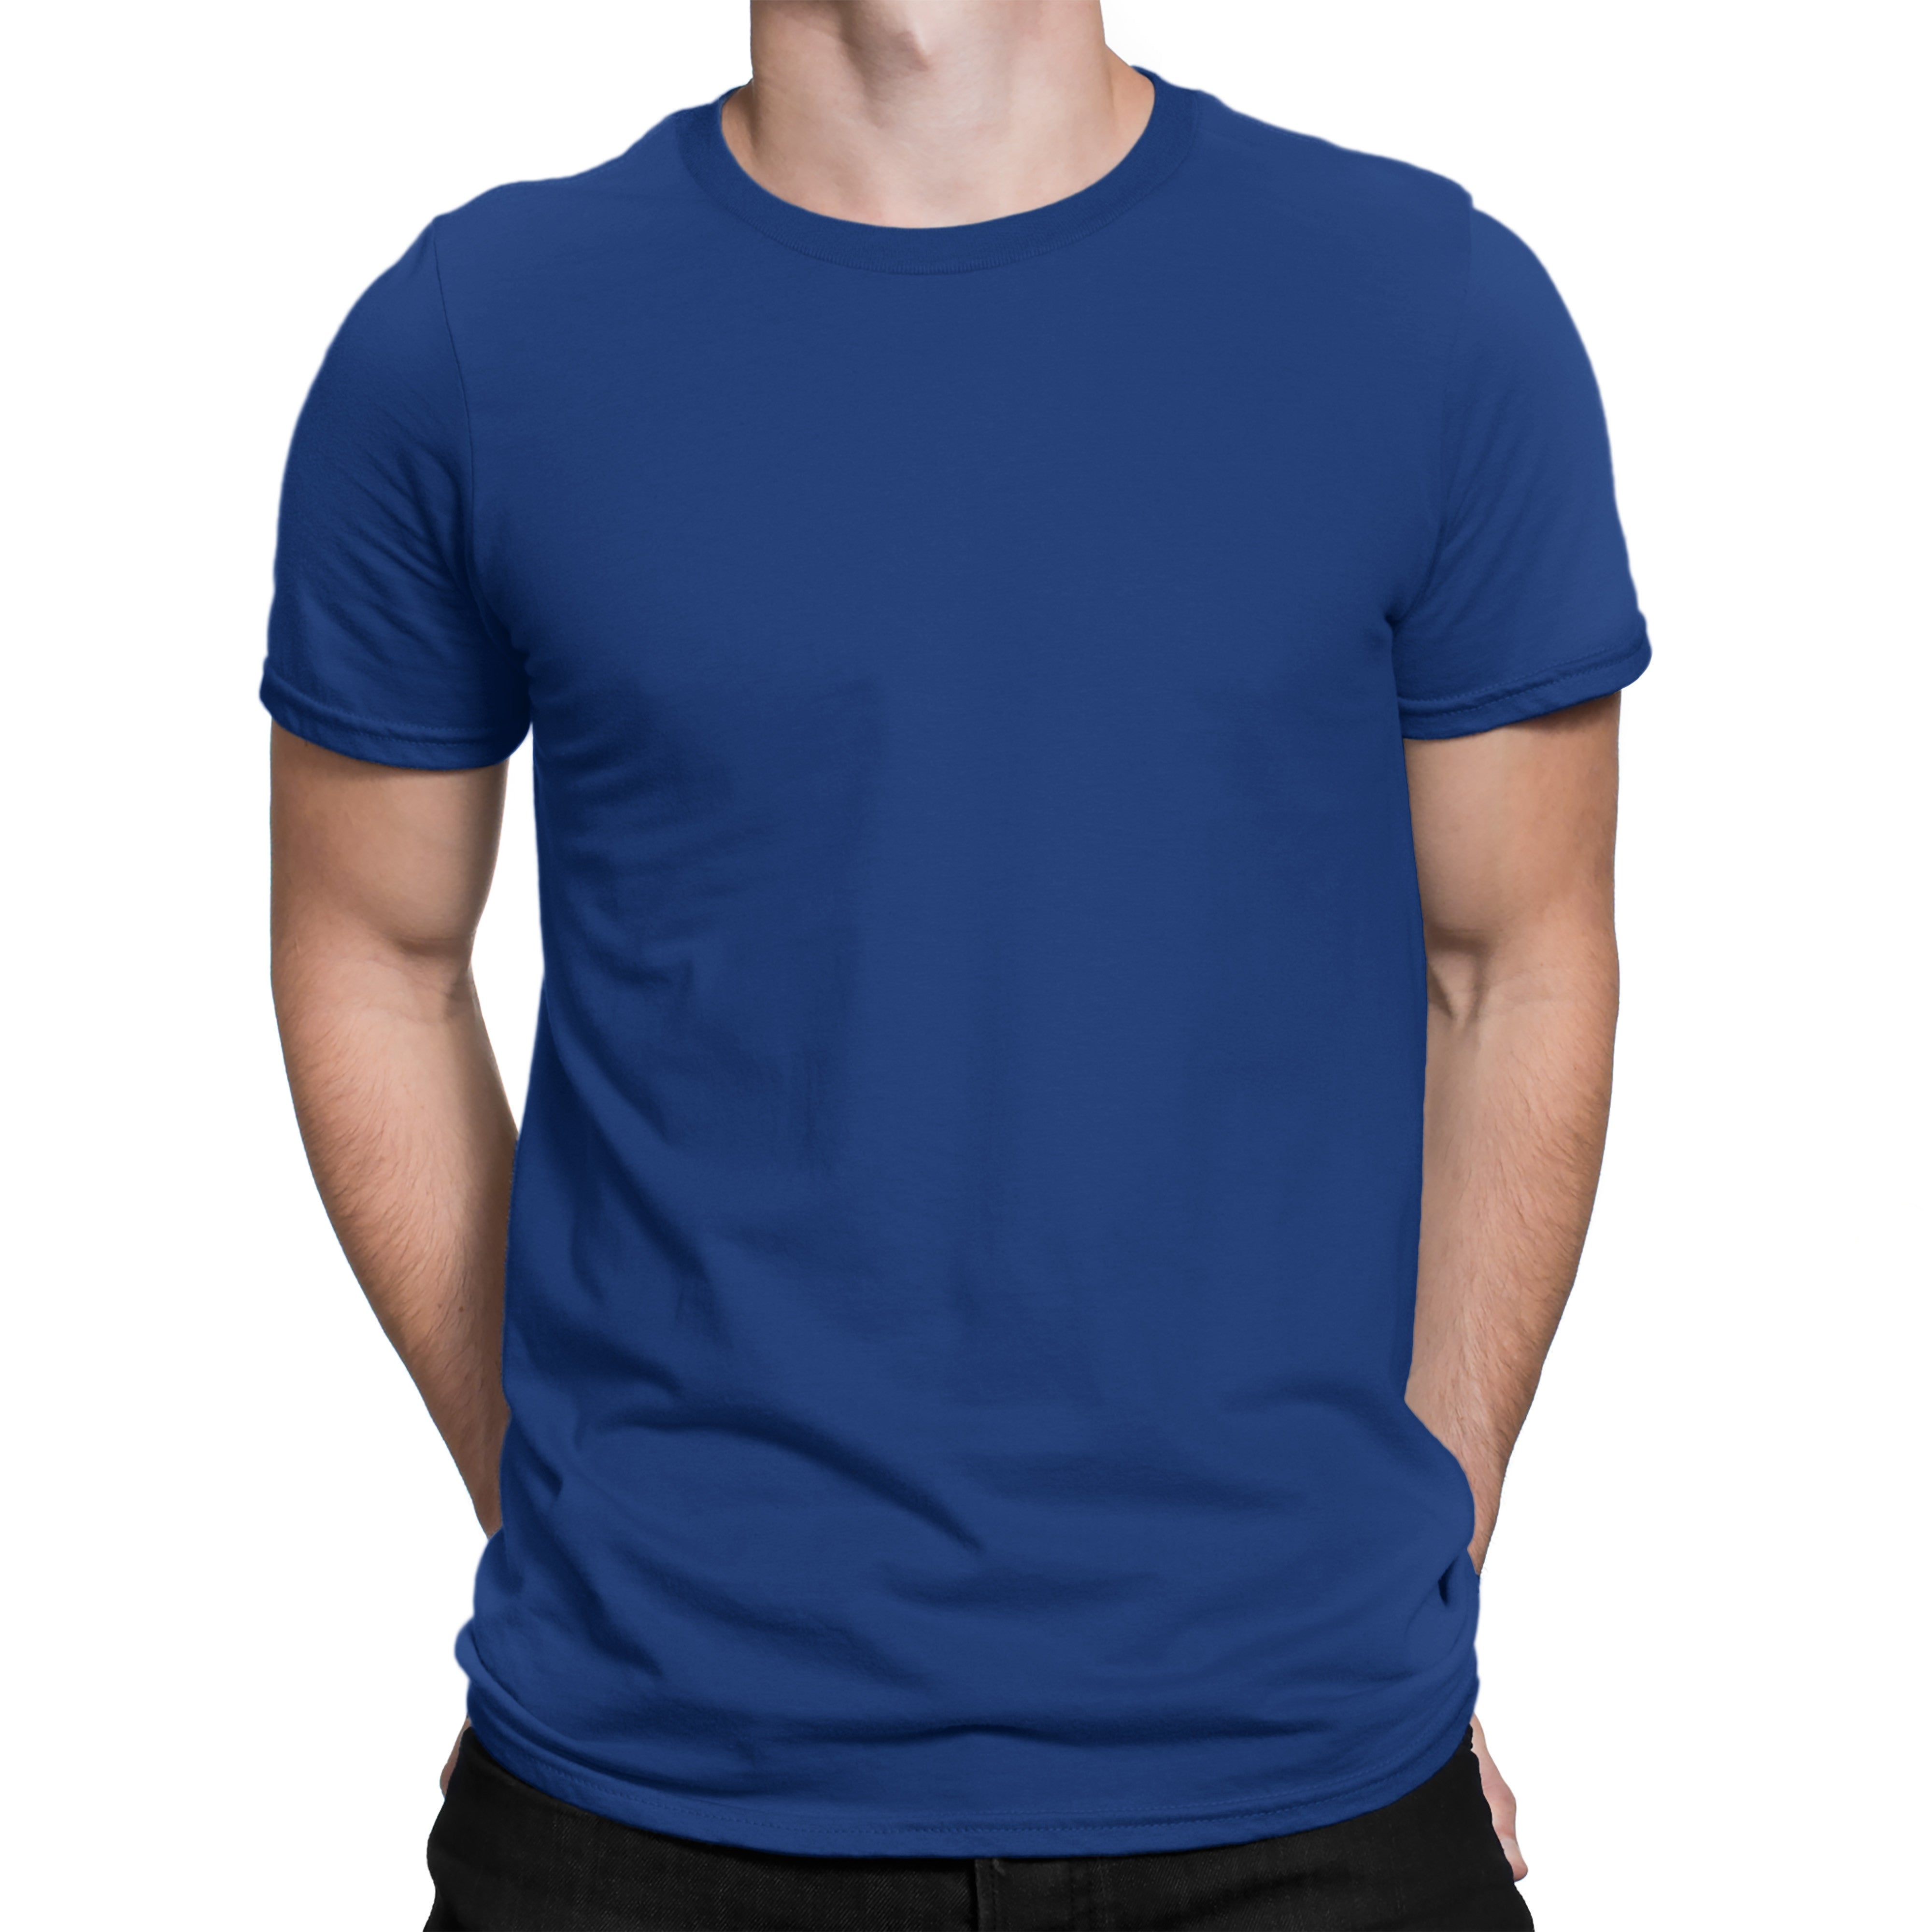 Men S Basic Royal Blue T Shirt By Silly Punter In India